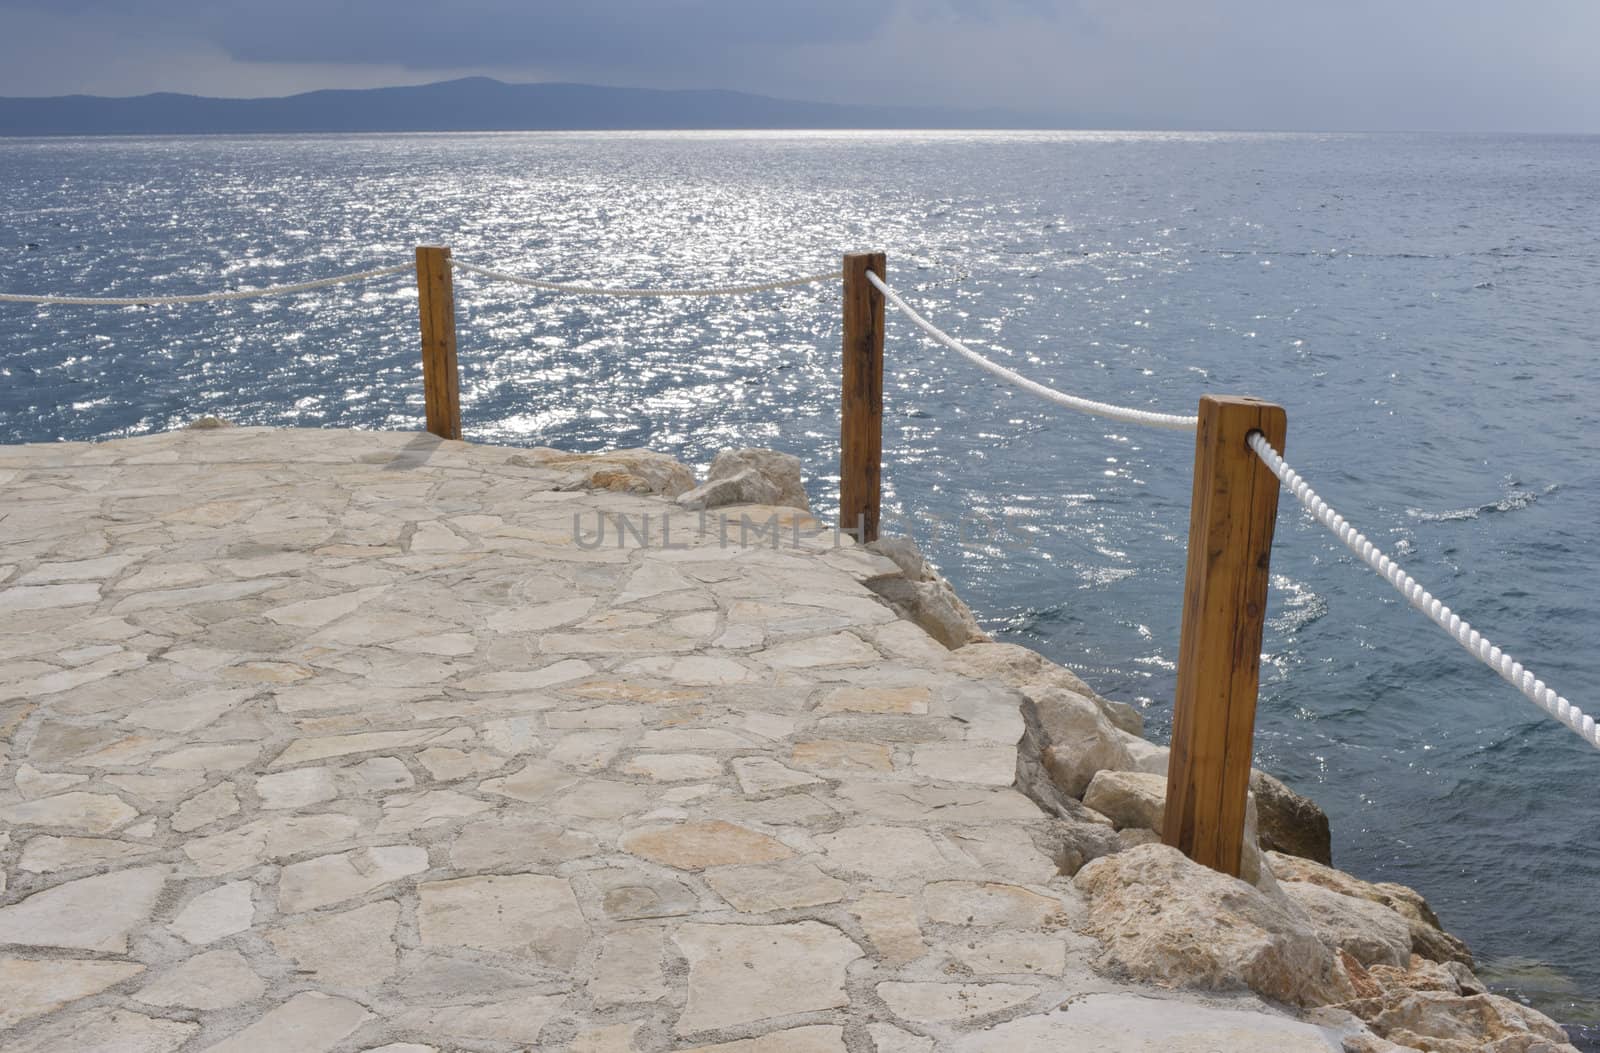 Detail of pier in little Croatian town at the Adriatic coast.